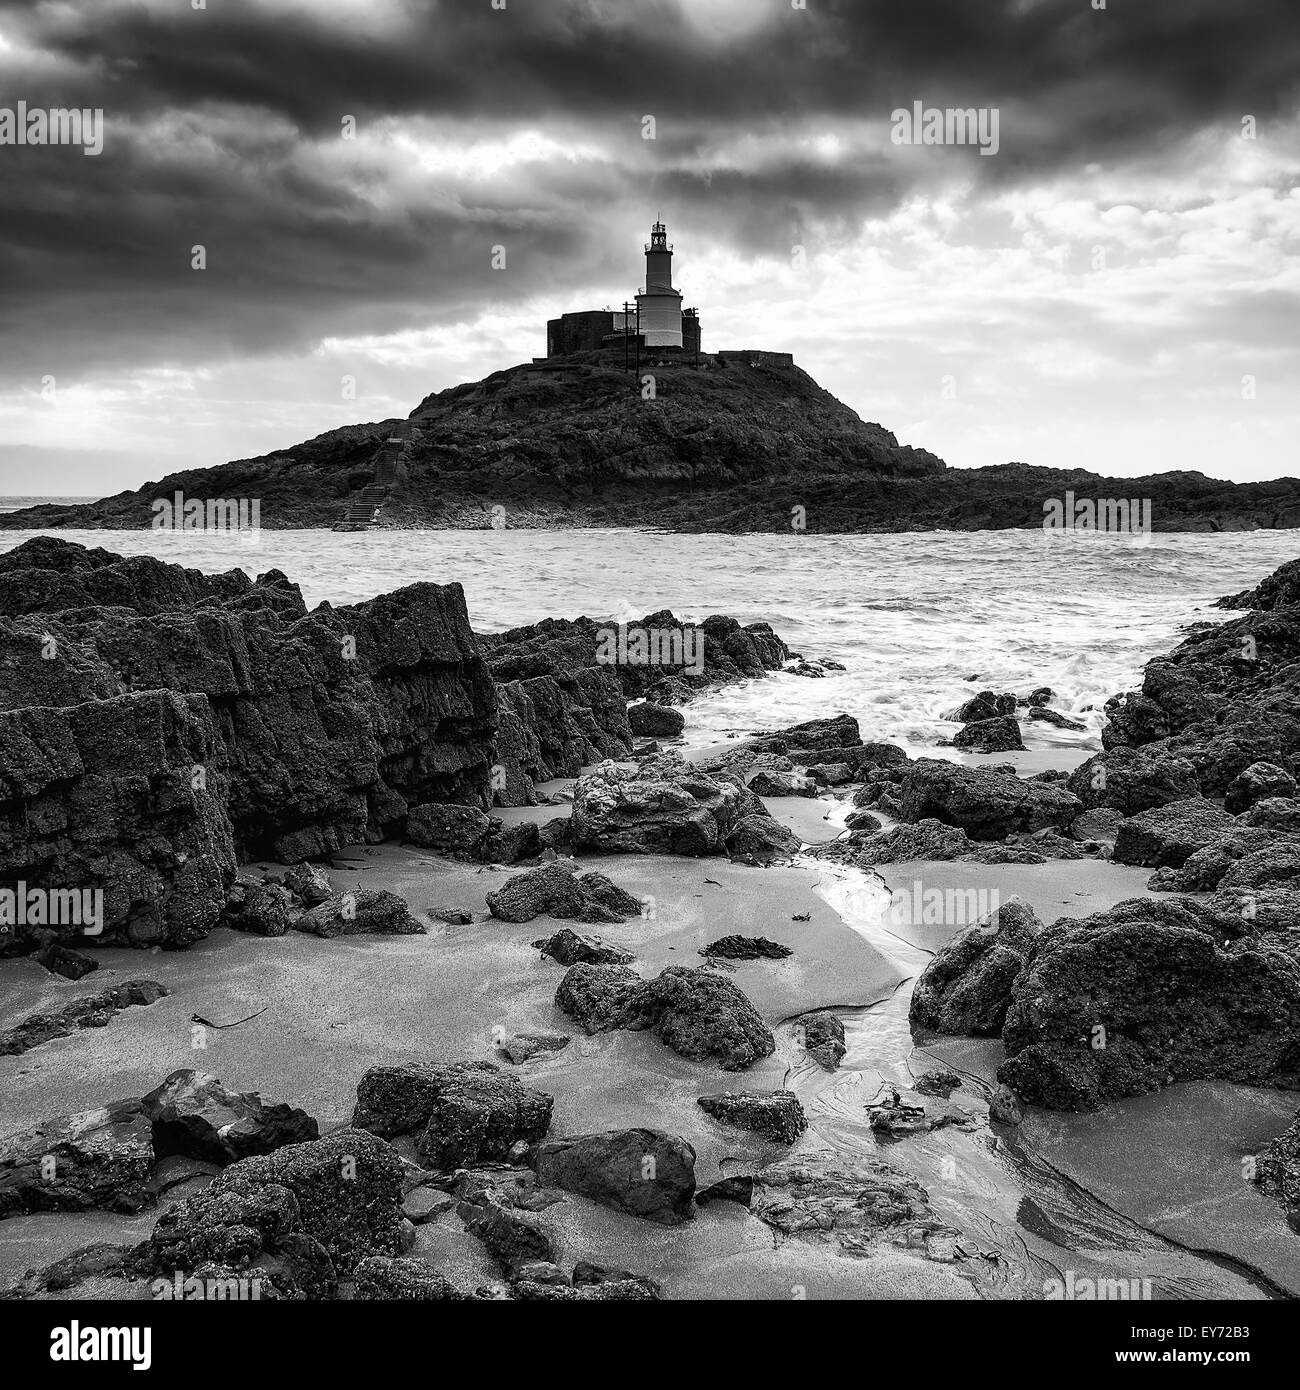 Lighthouse landscape with stormy sky over sea in black and white Stock Photo